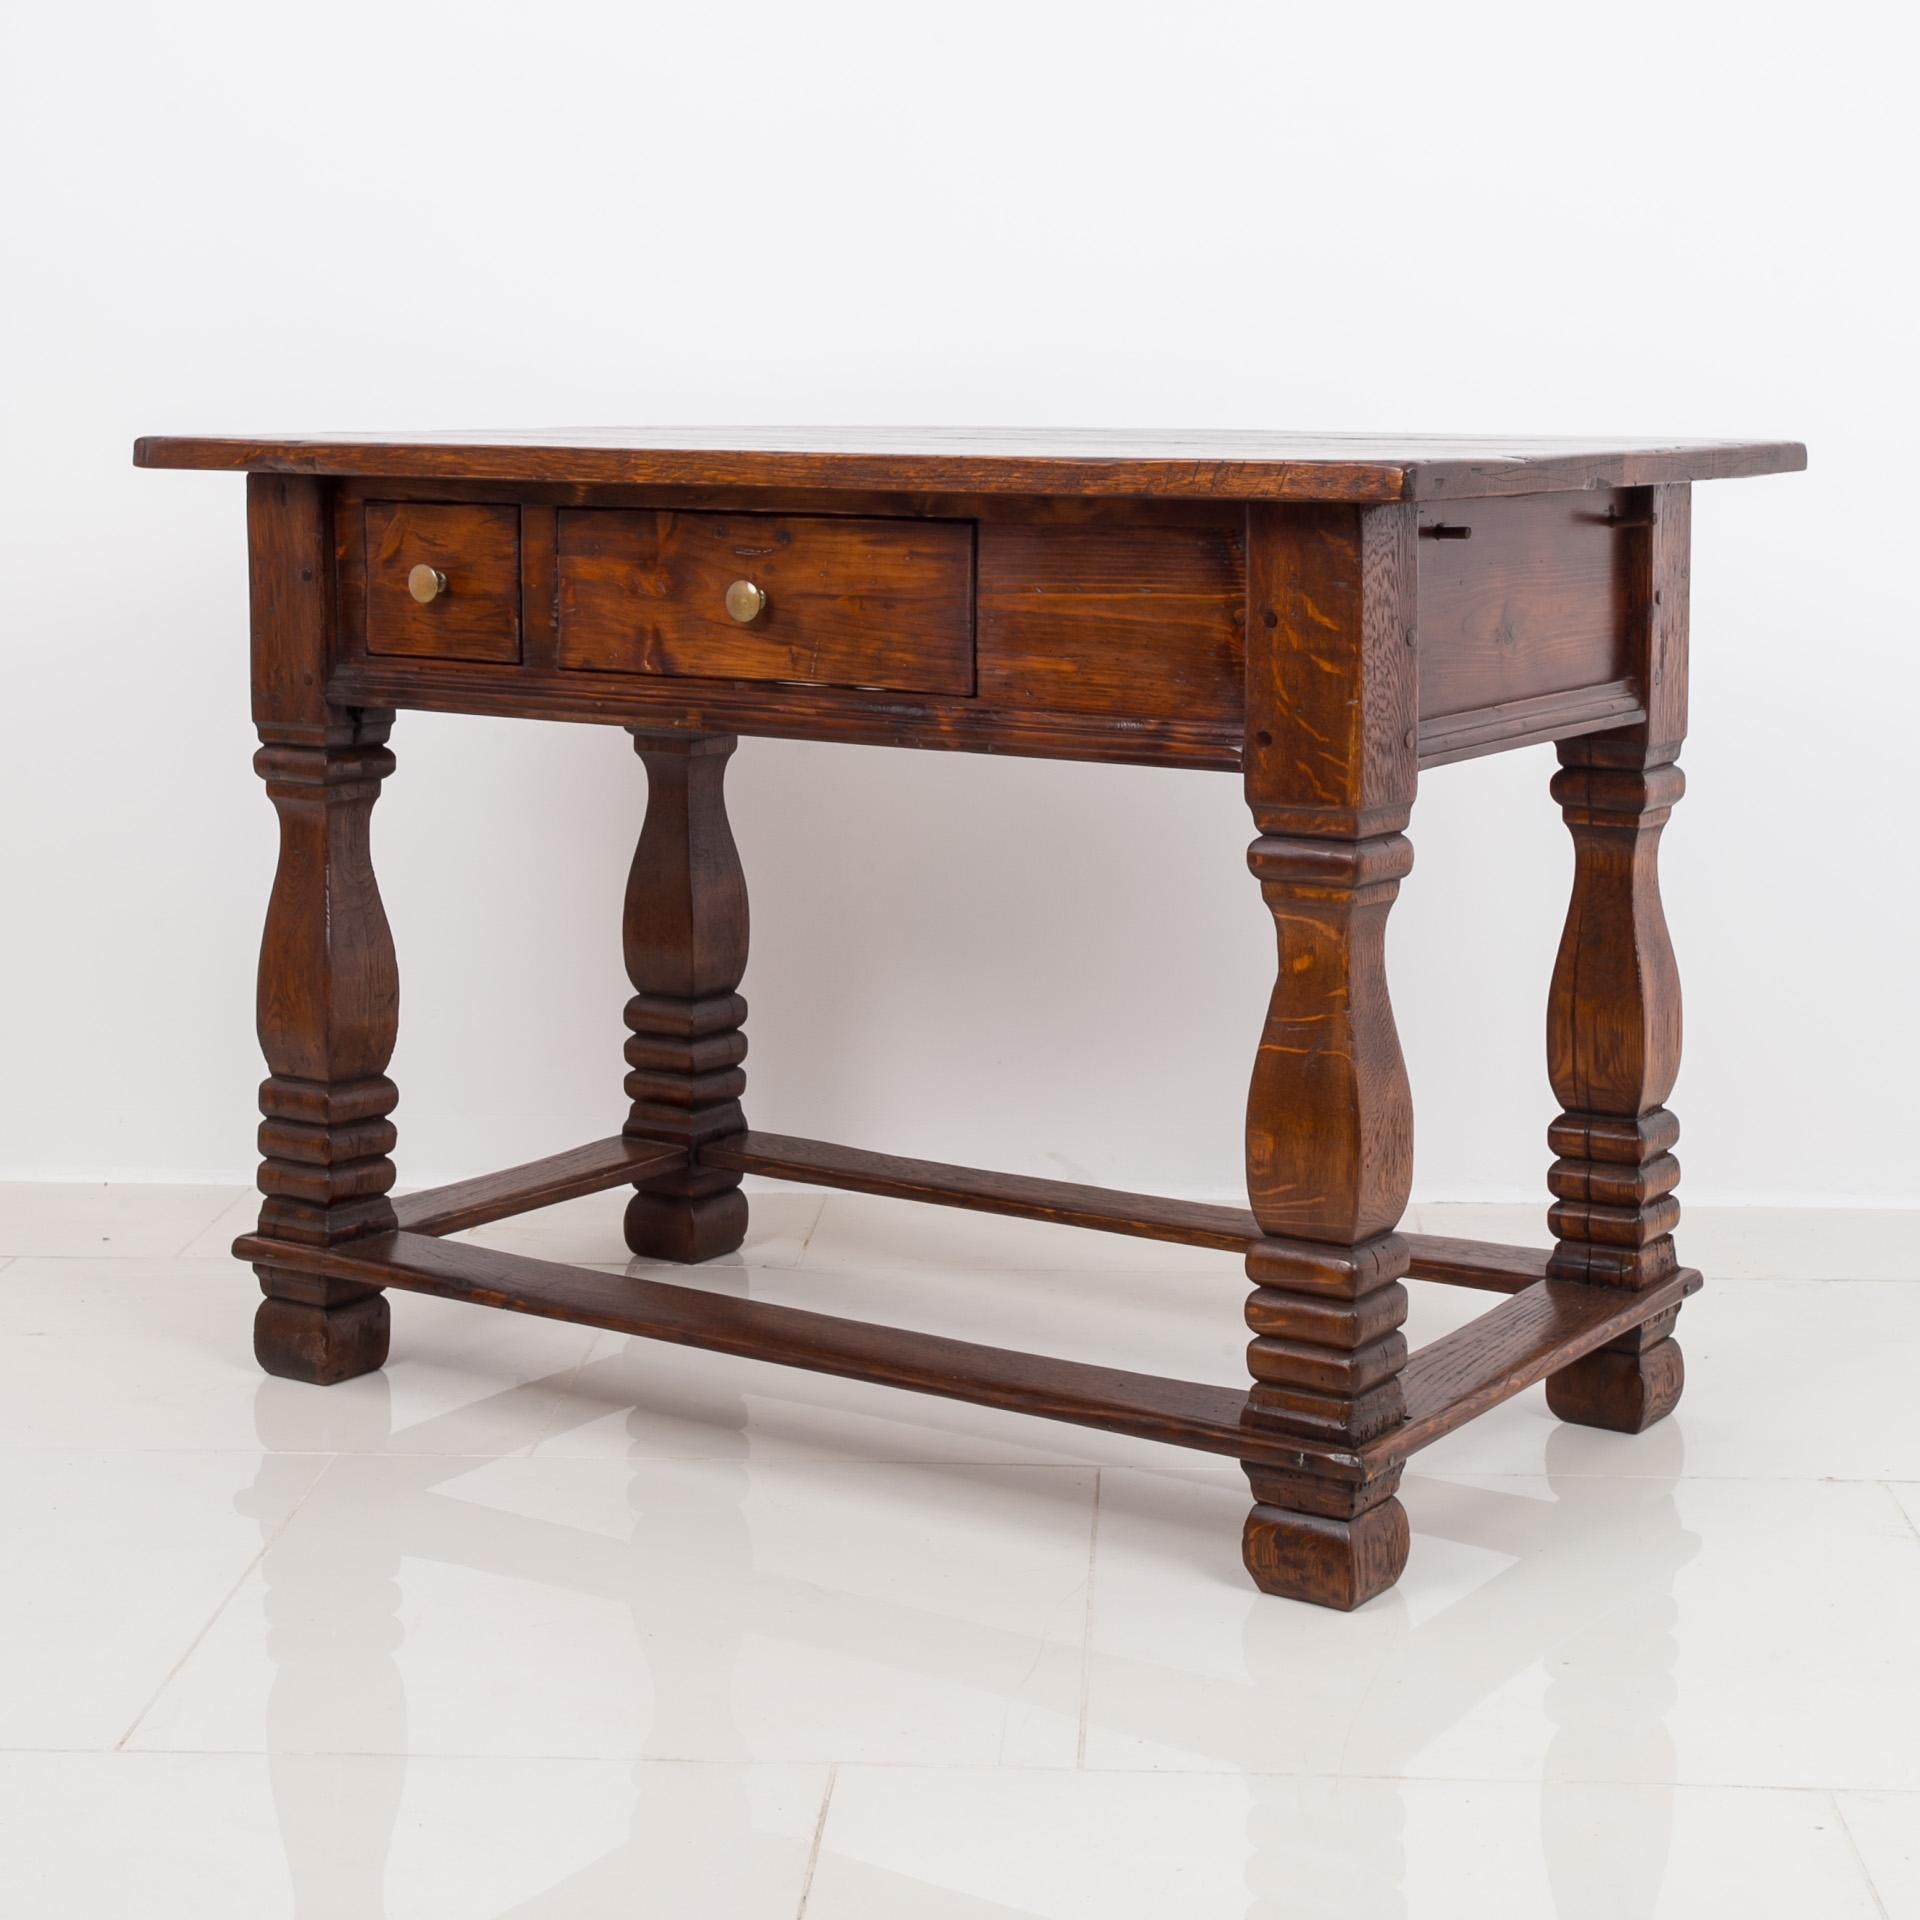 Solid Oak Table, 18th / 19th Century, Rustic Style, Prep or Dining Table In Good Condition In Wrocław, Poland